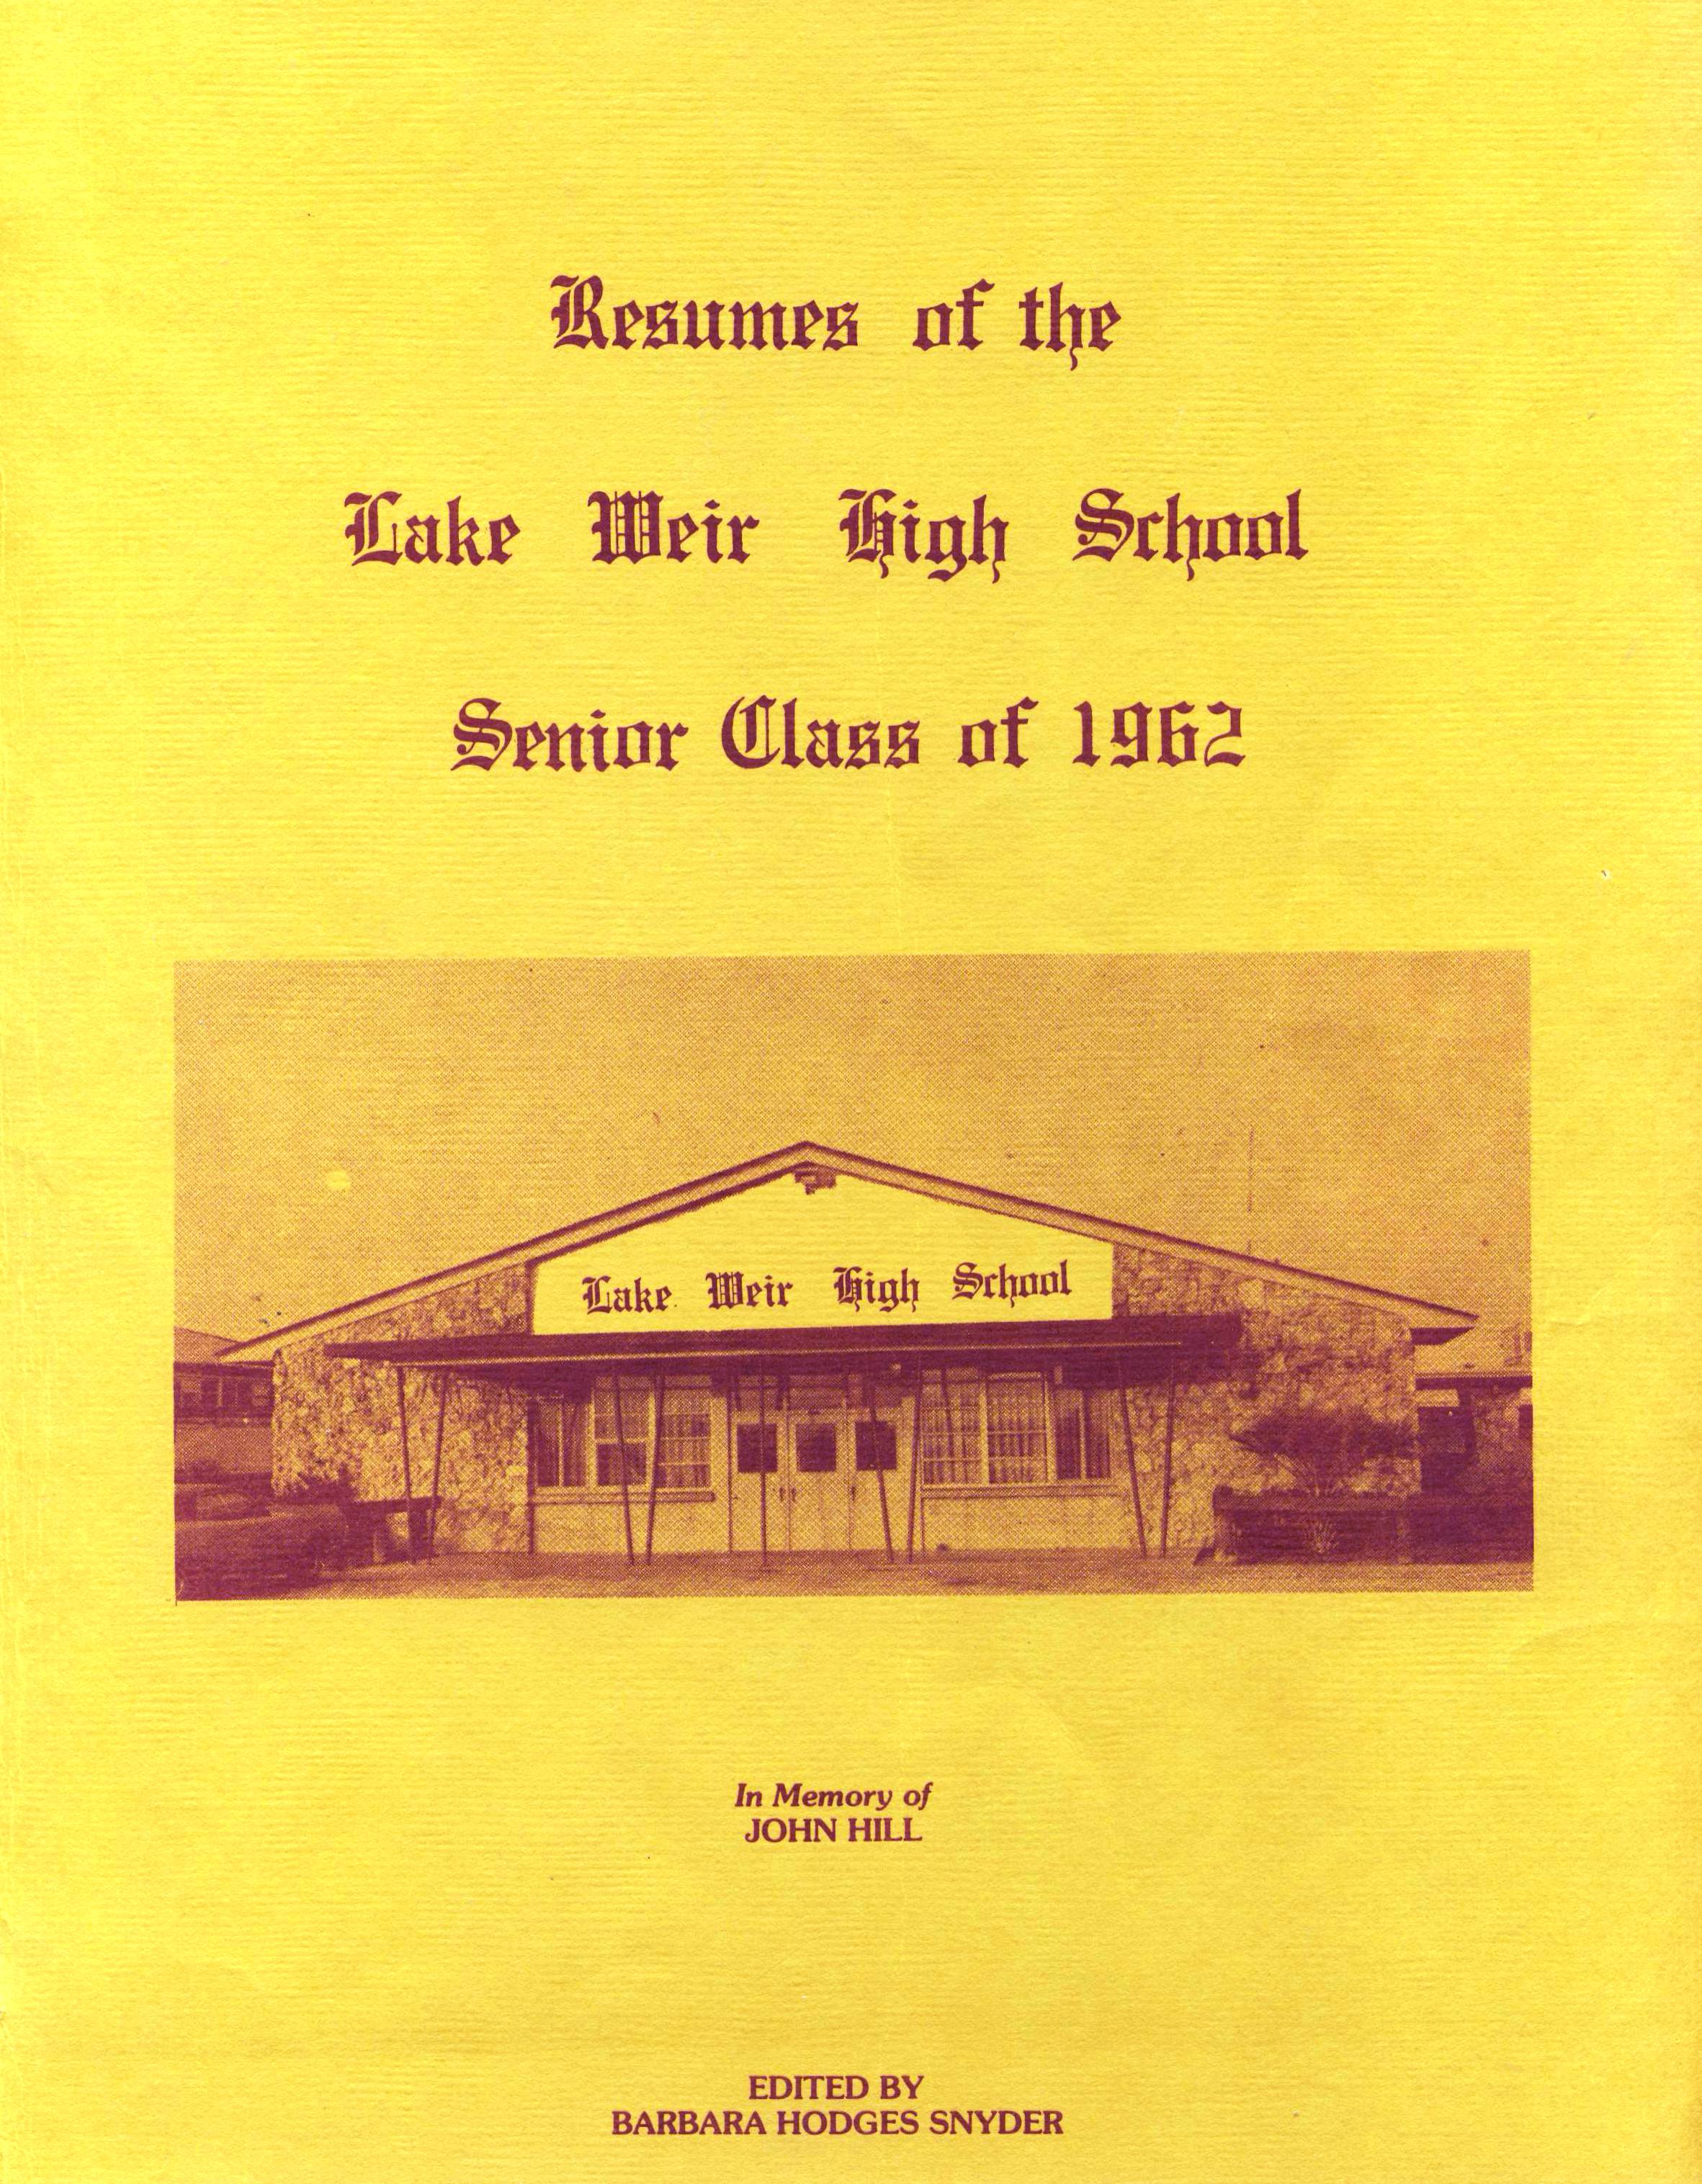 Class of '62 Resumes 1978